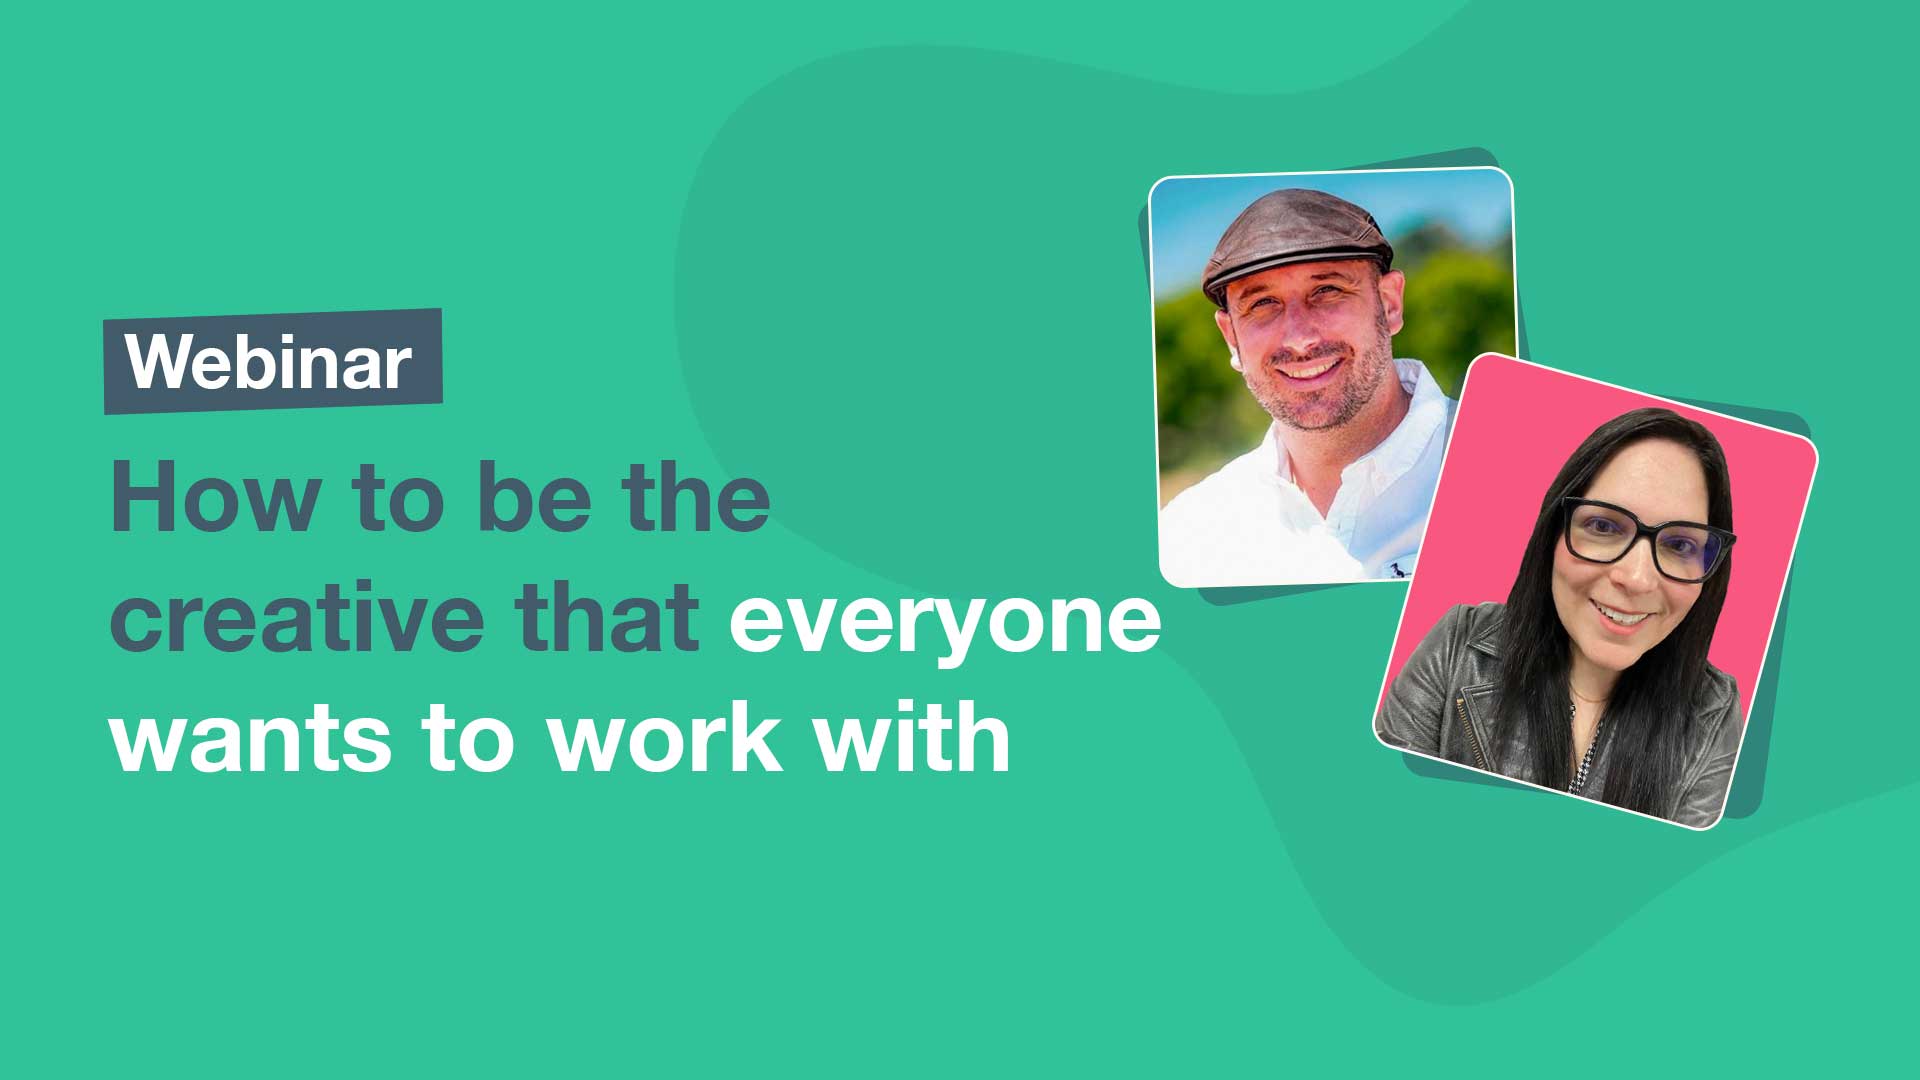 Webinar: How to be a creative that everyone wants to work with